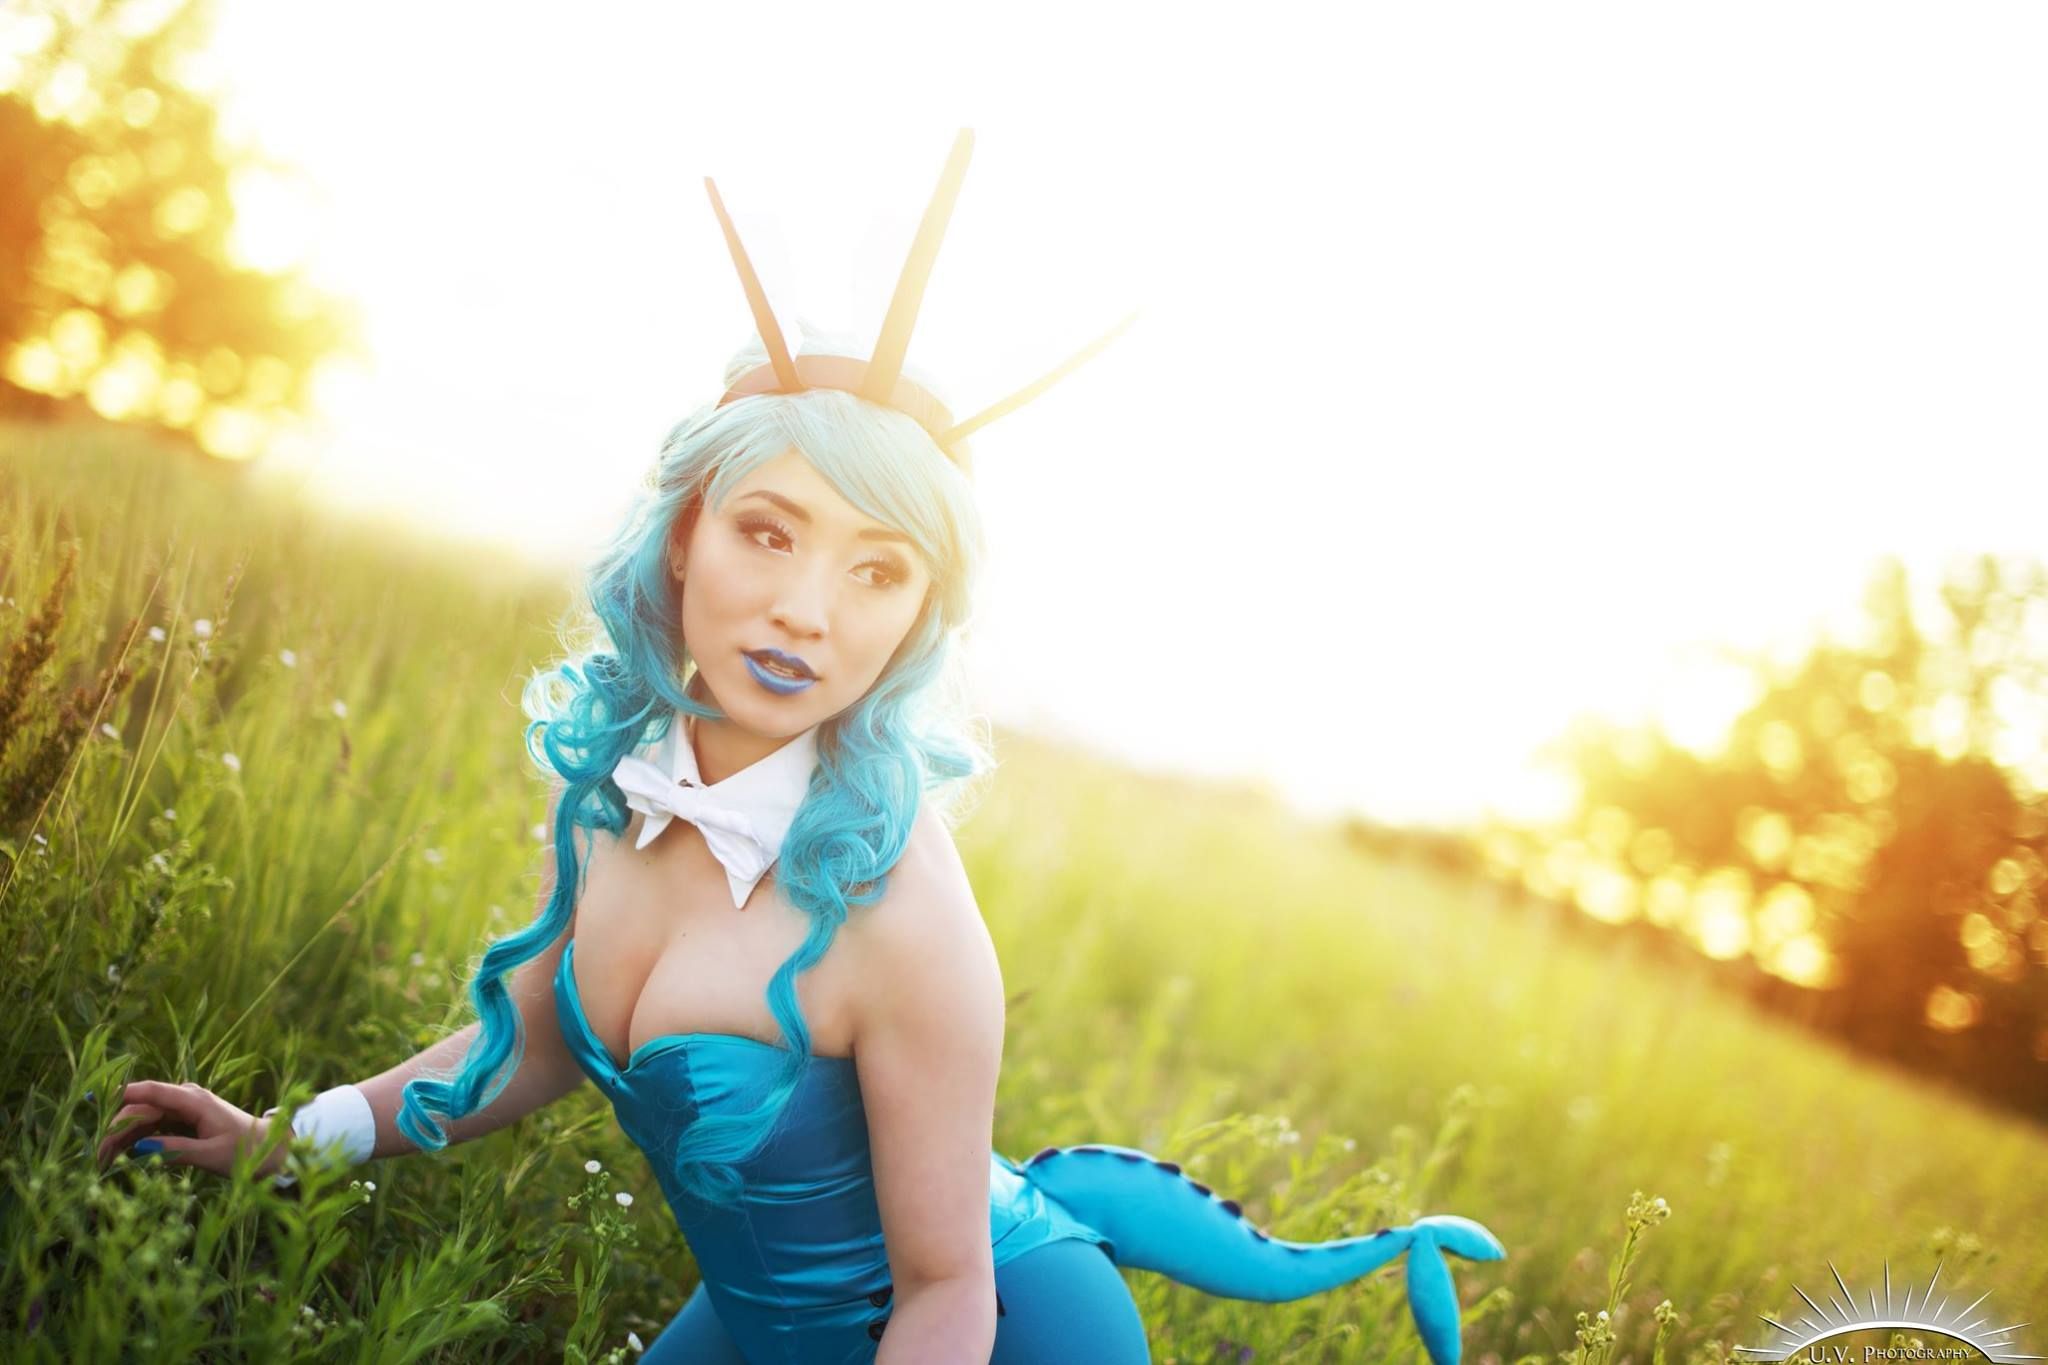 25 Hottest Pokémon Cosplay Of All Time